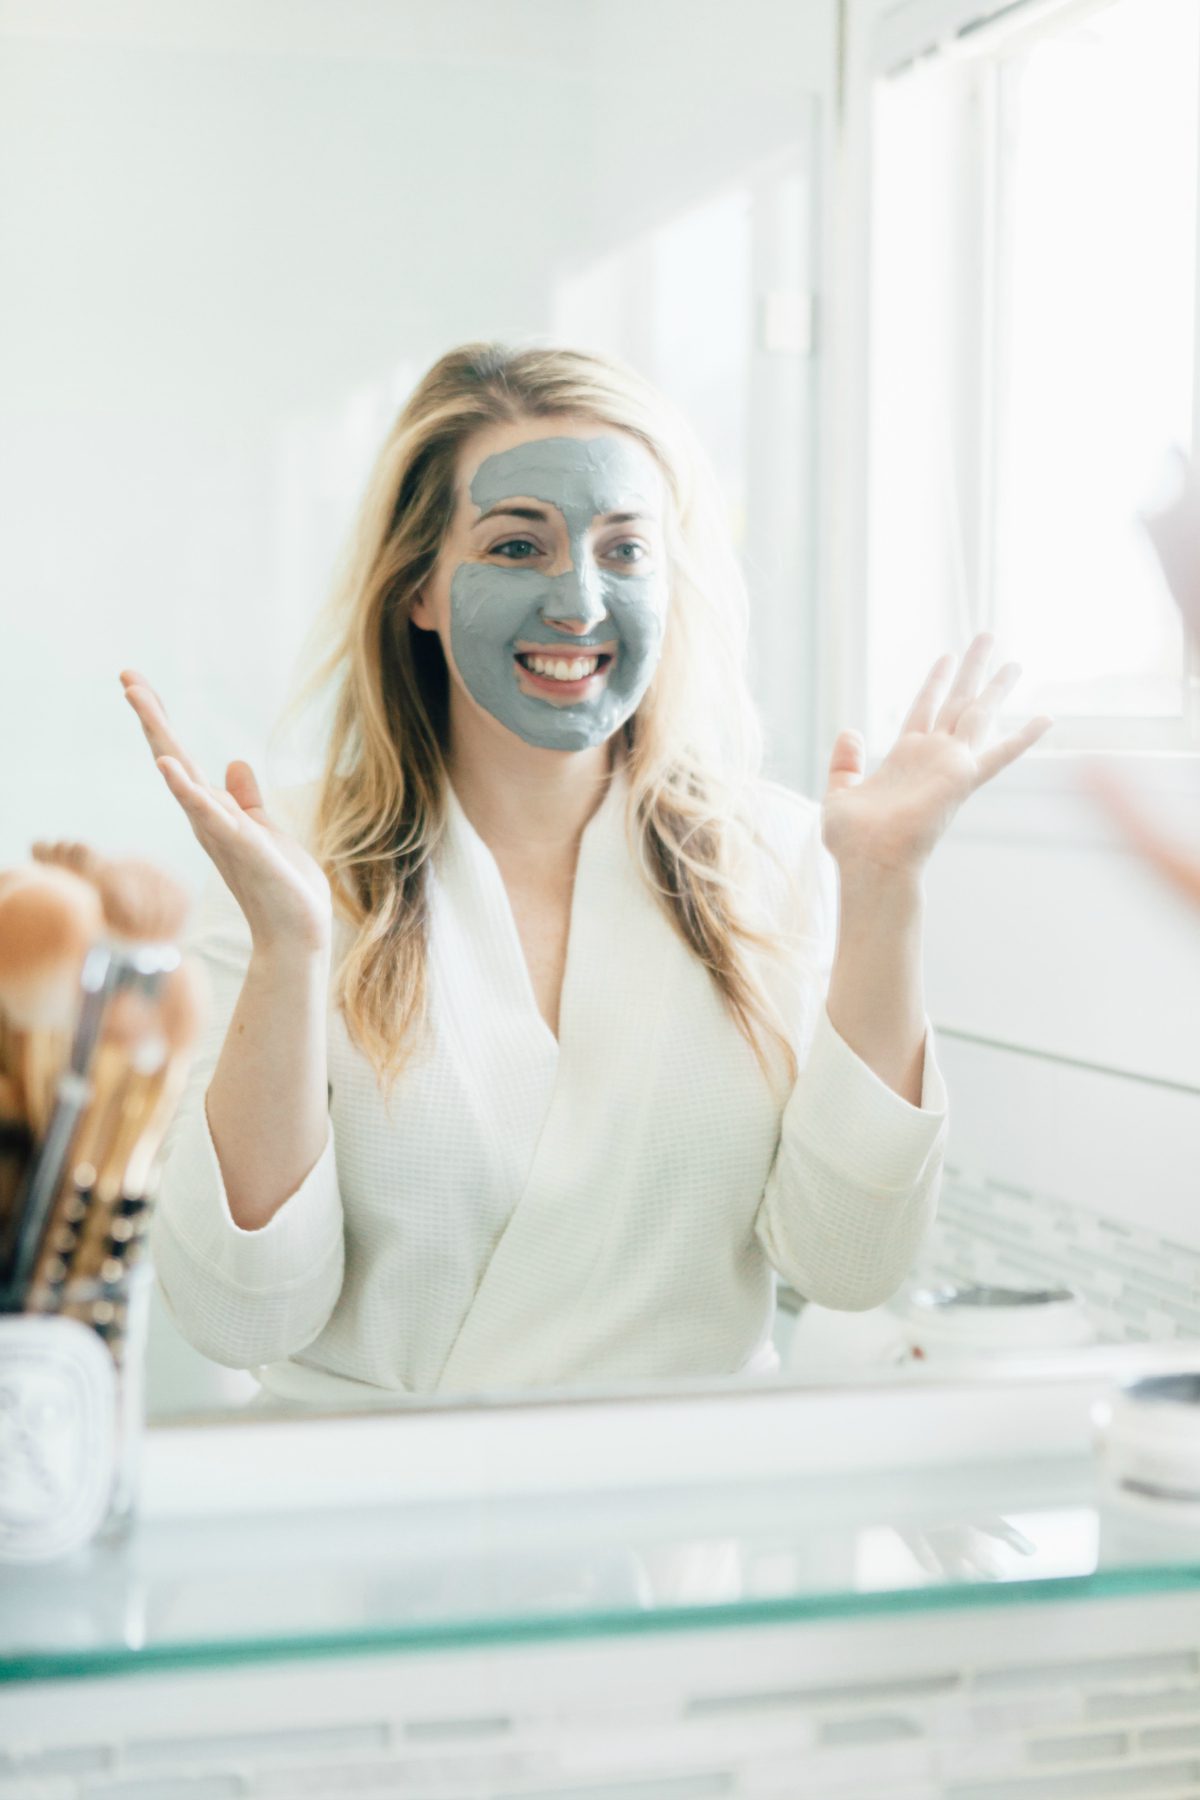 9 face washing mistakes you're doing